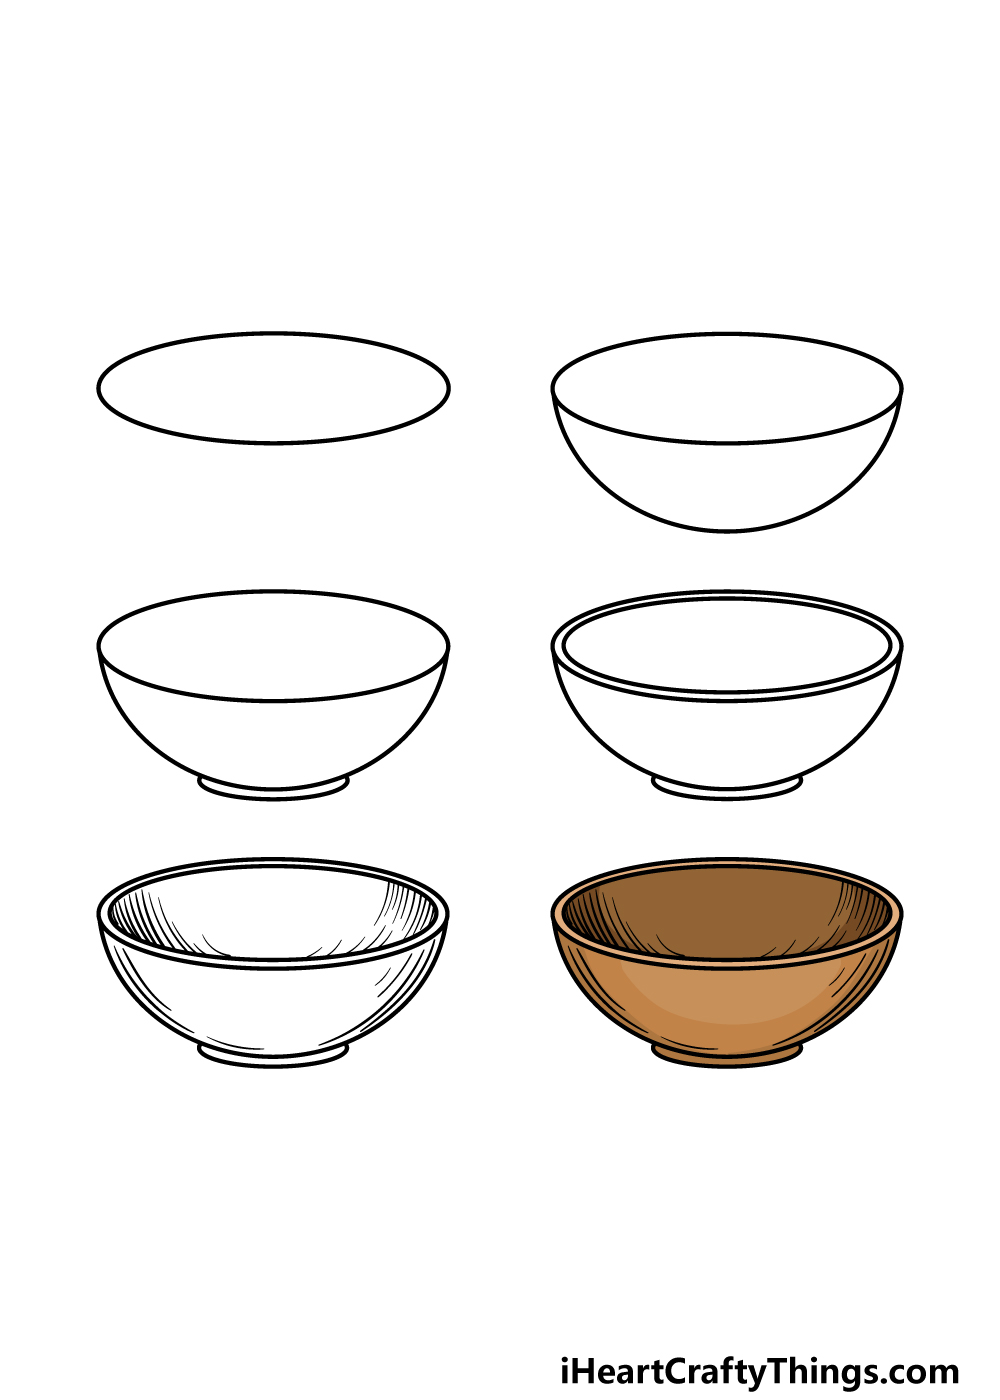 how to draw a Bowl in 6 steps